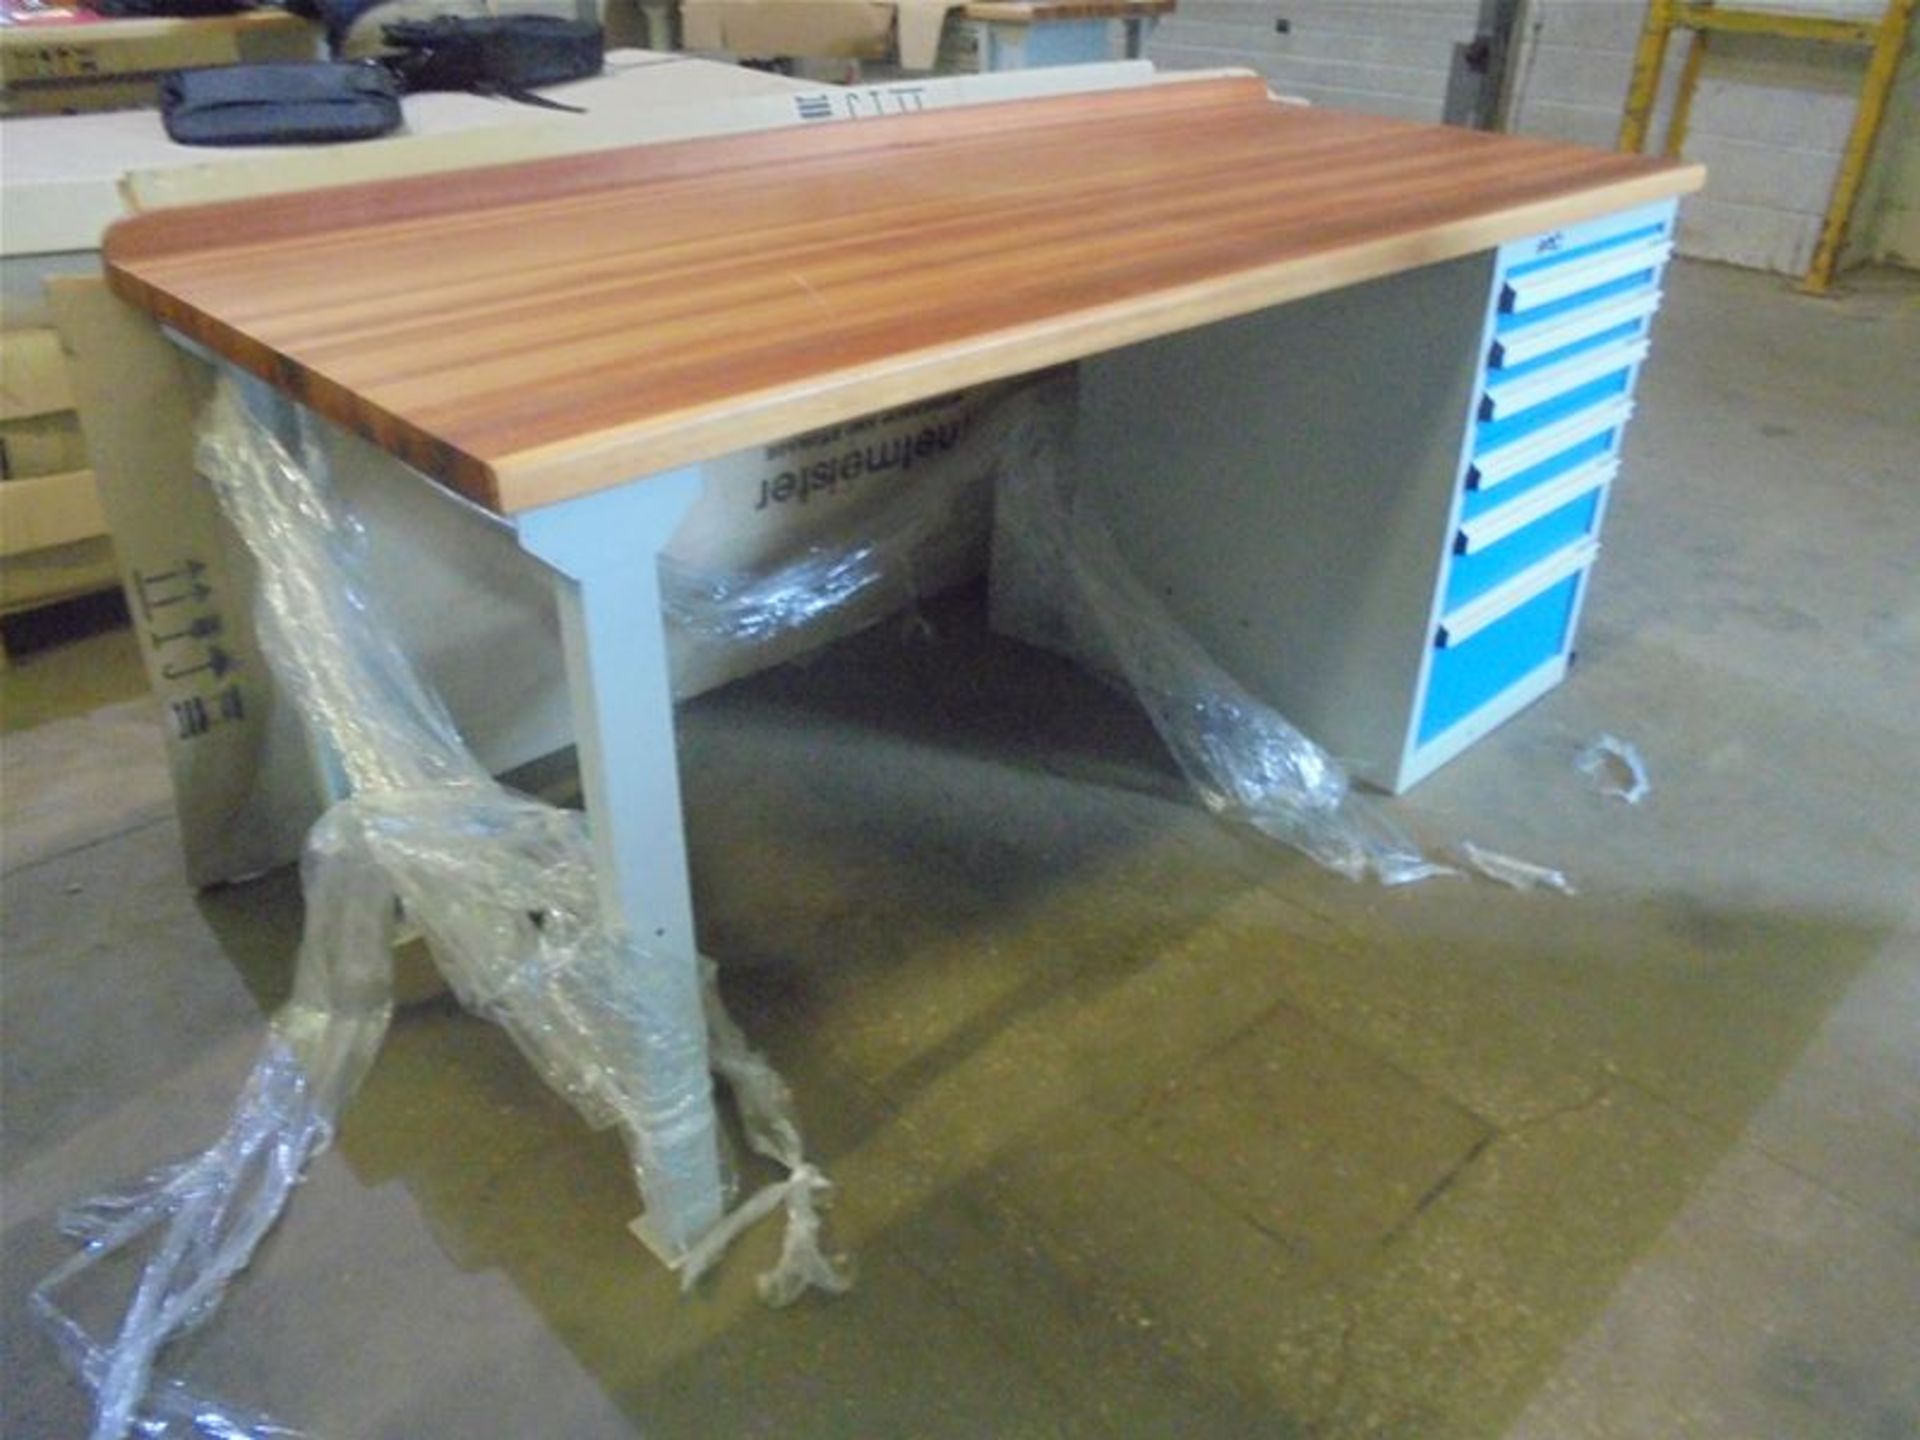 Workbench WKS 500-20T with Saligna Top and C850 Cabinet Drawer - Image 2 of 3